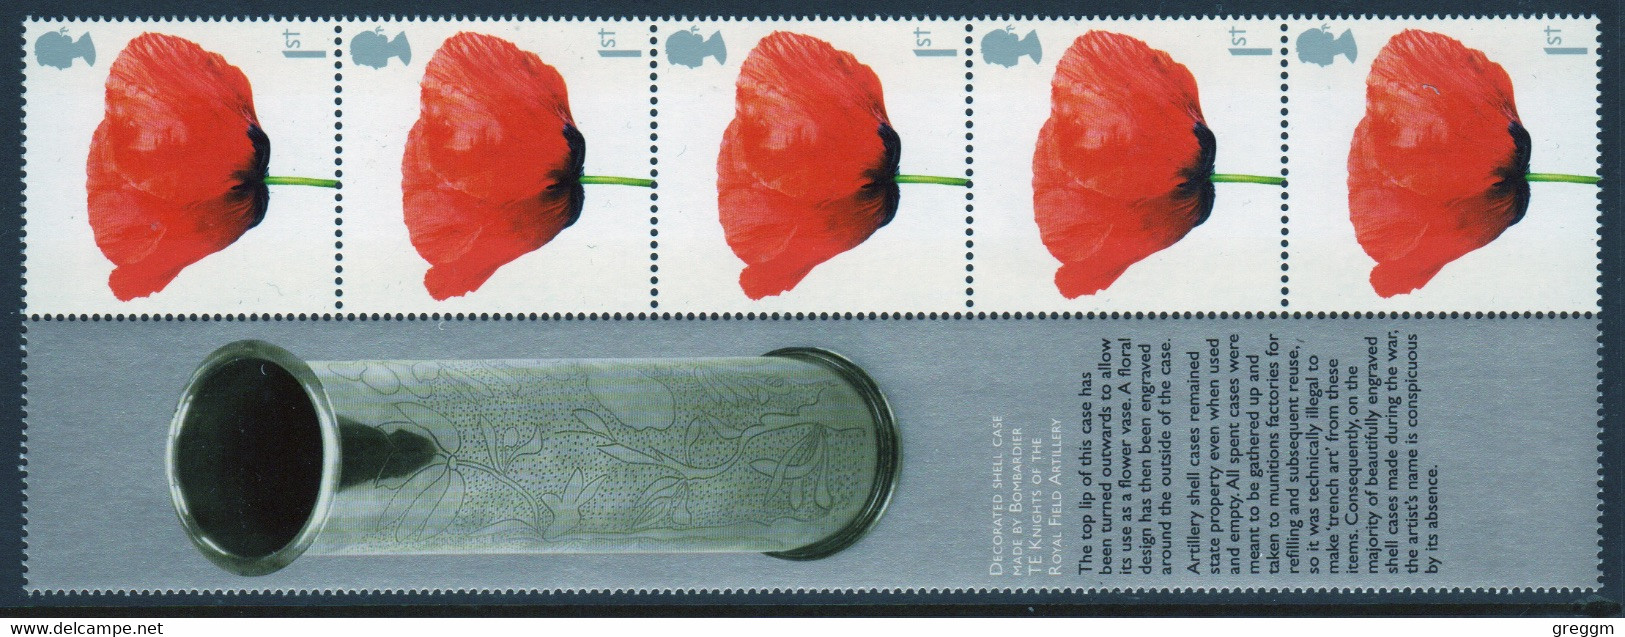 Great Britain 2008 Five 1st Smiler Sheet Commemorative Stamps With Label From The Lest We Forget Set In Unmounted Mint. - Francobolli Personalizzati